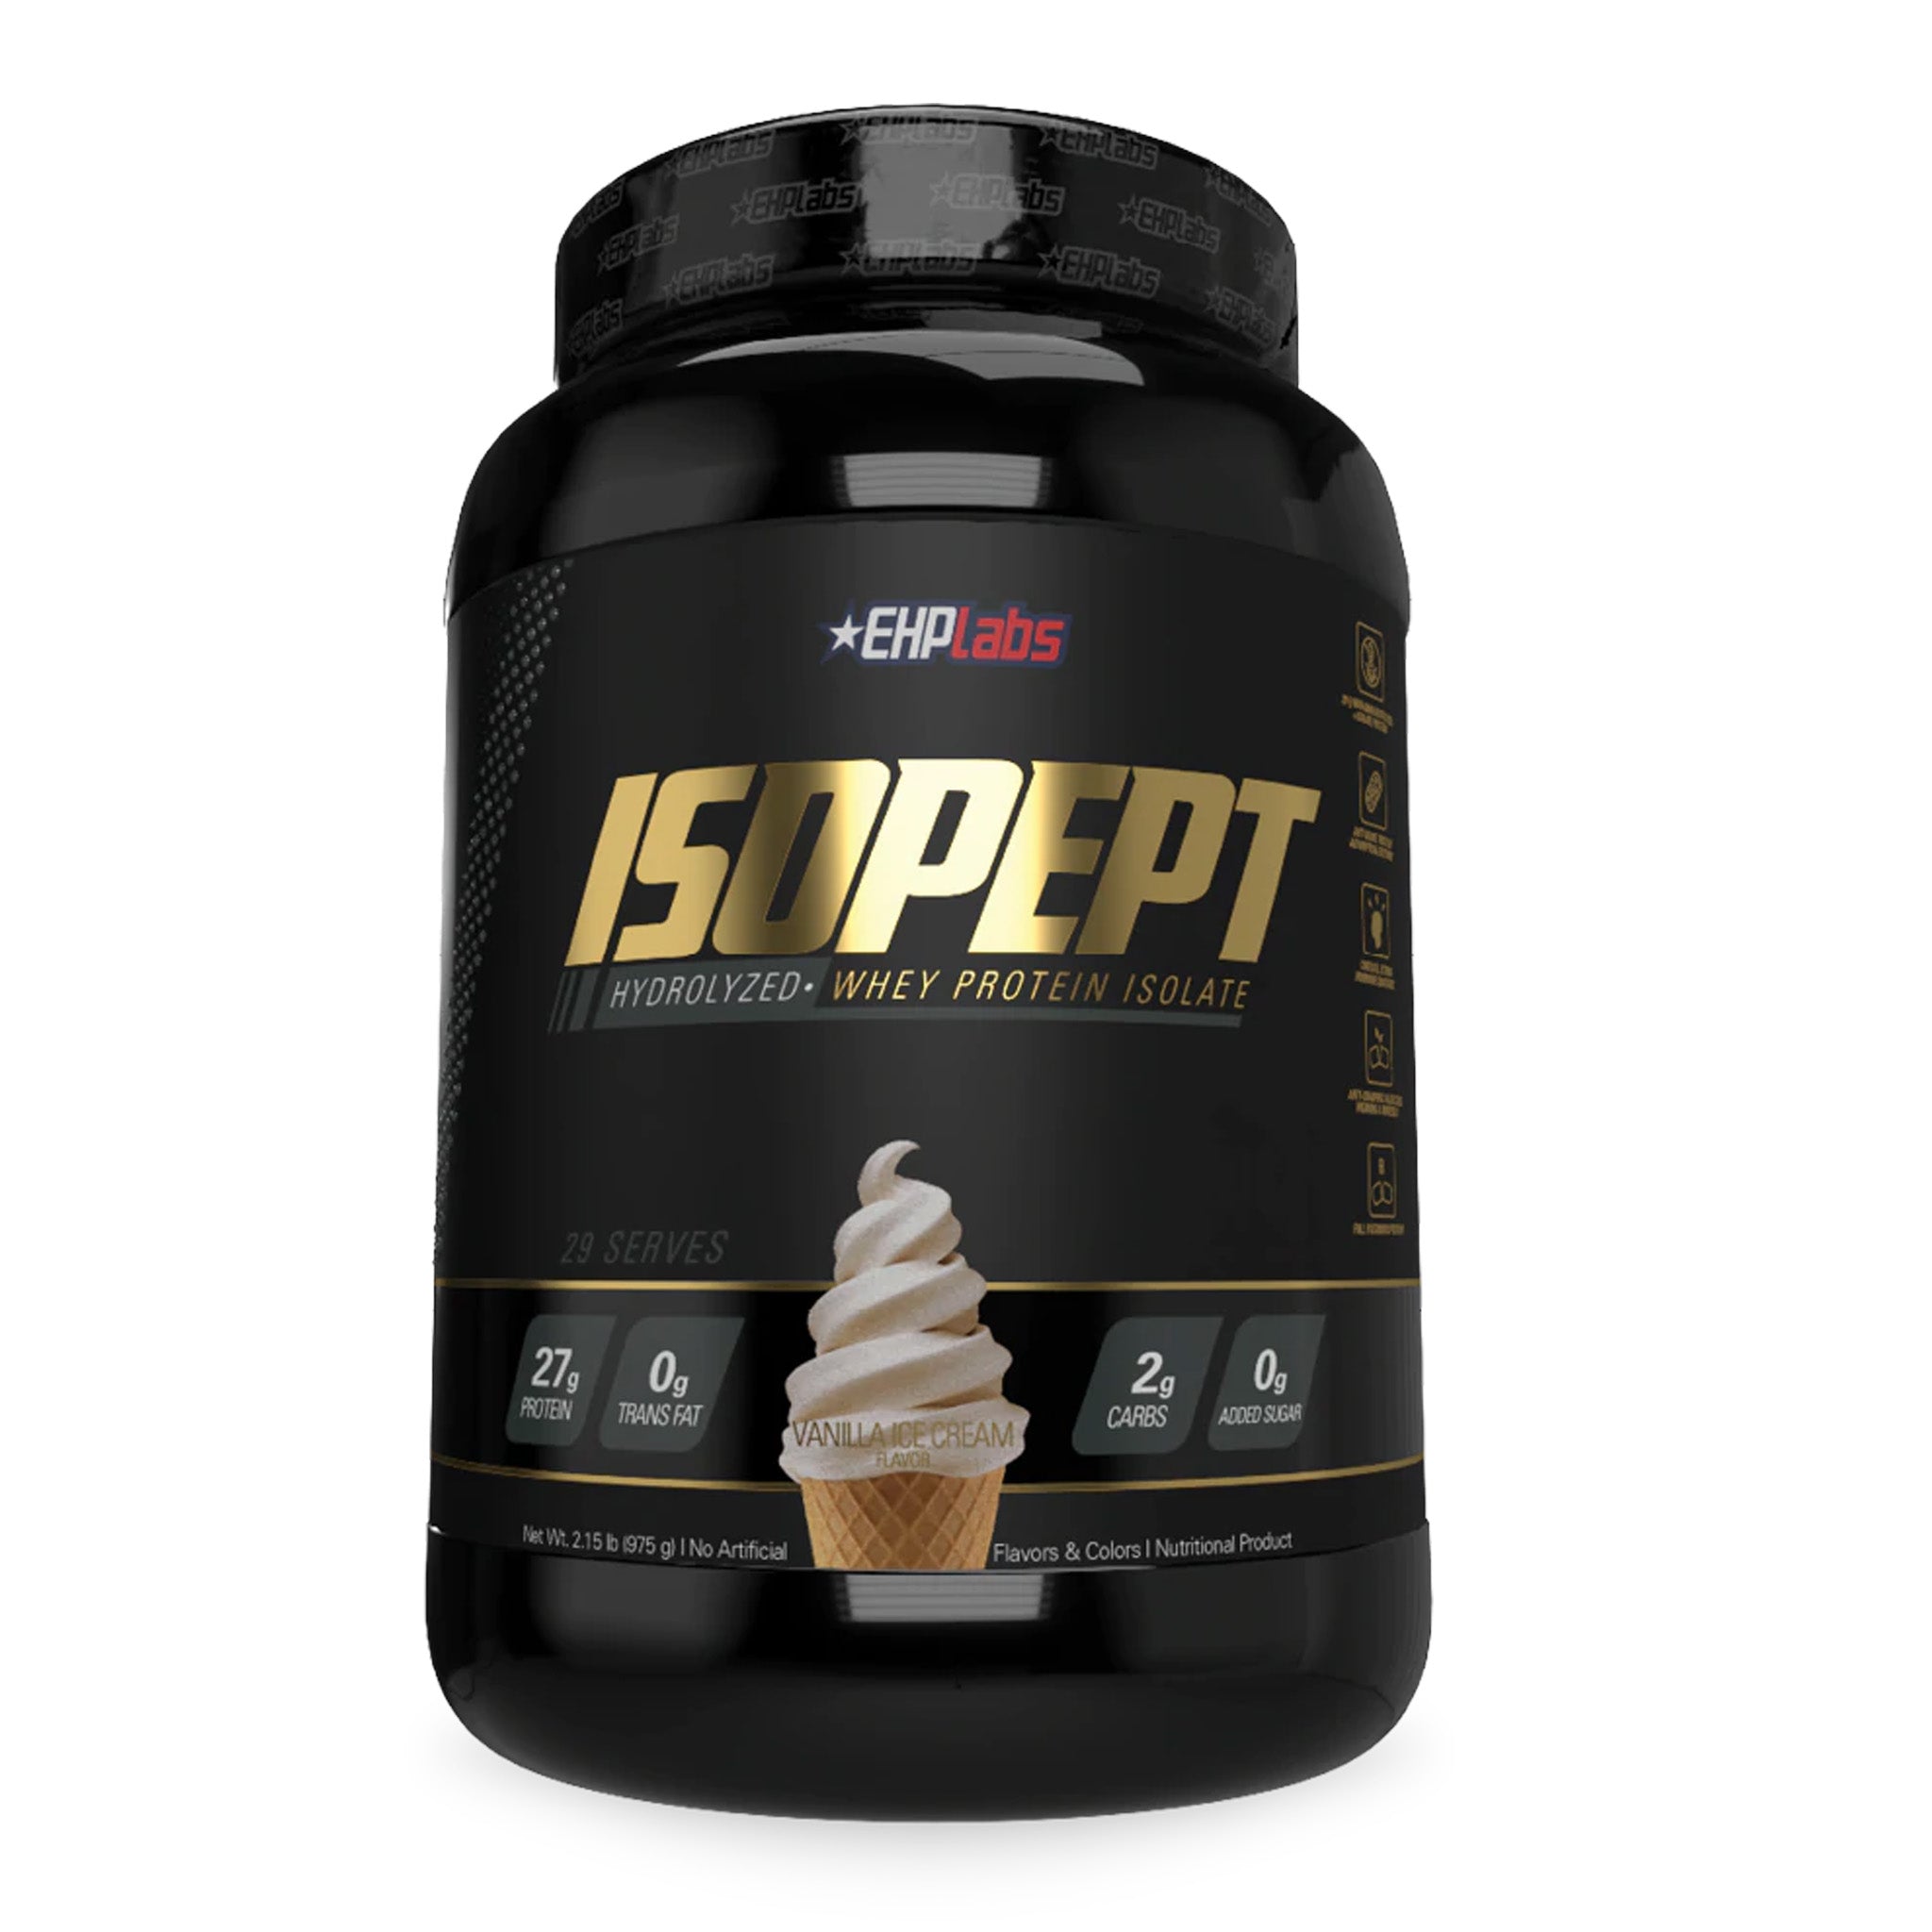 Isopept Hydrolyzed Whey Protein (2lbs)